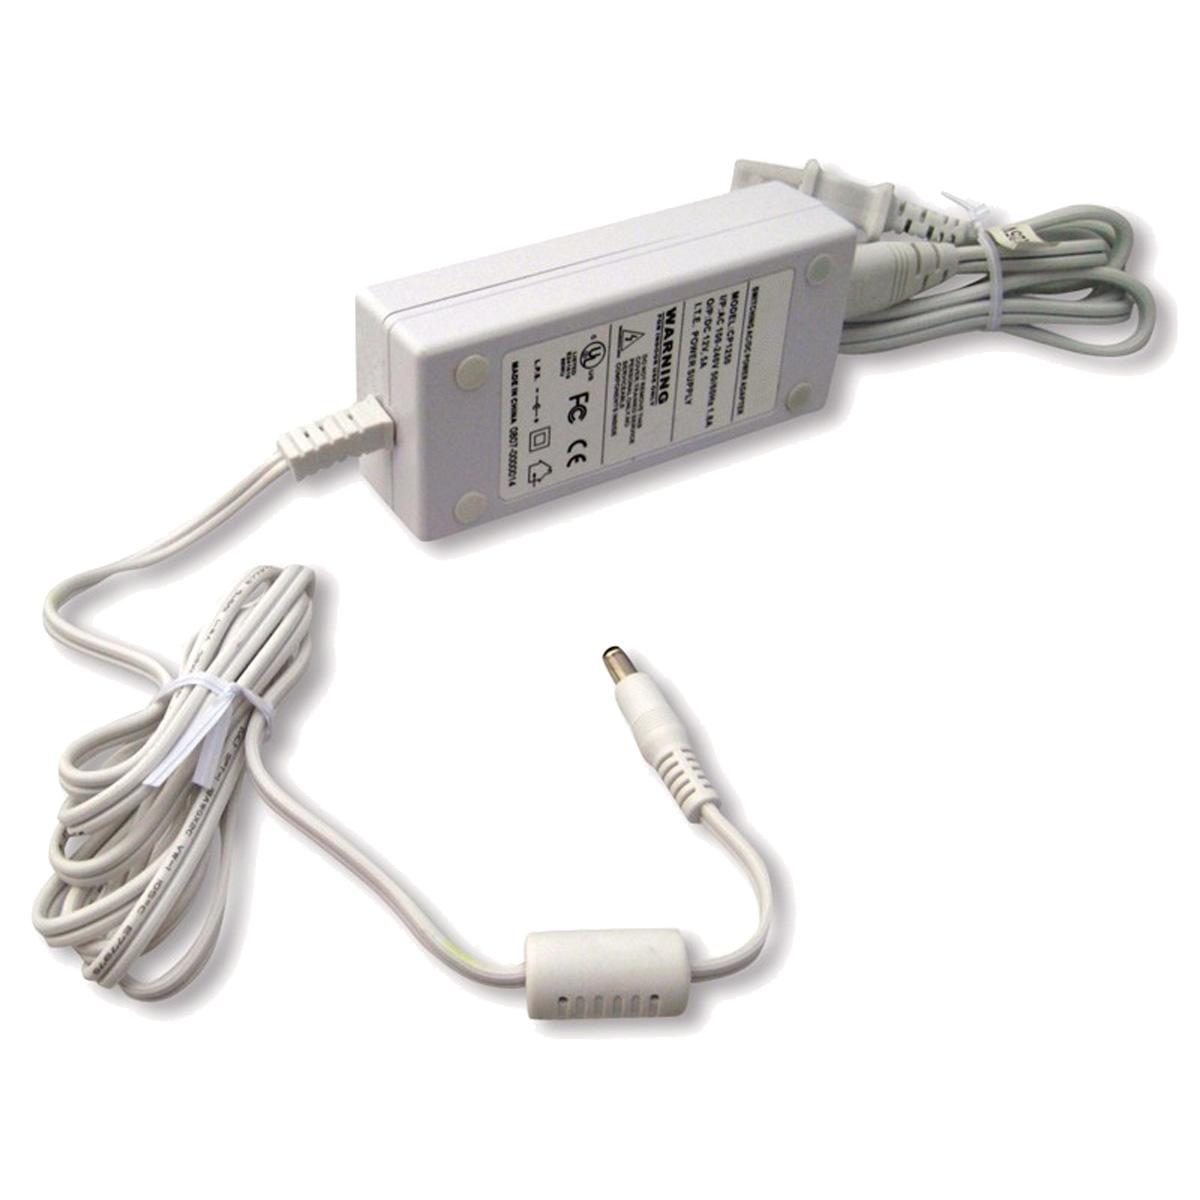 Plug-and-Play LED Power Supplies - 12V and 24V Adapters